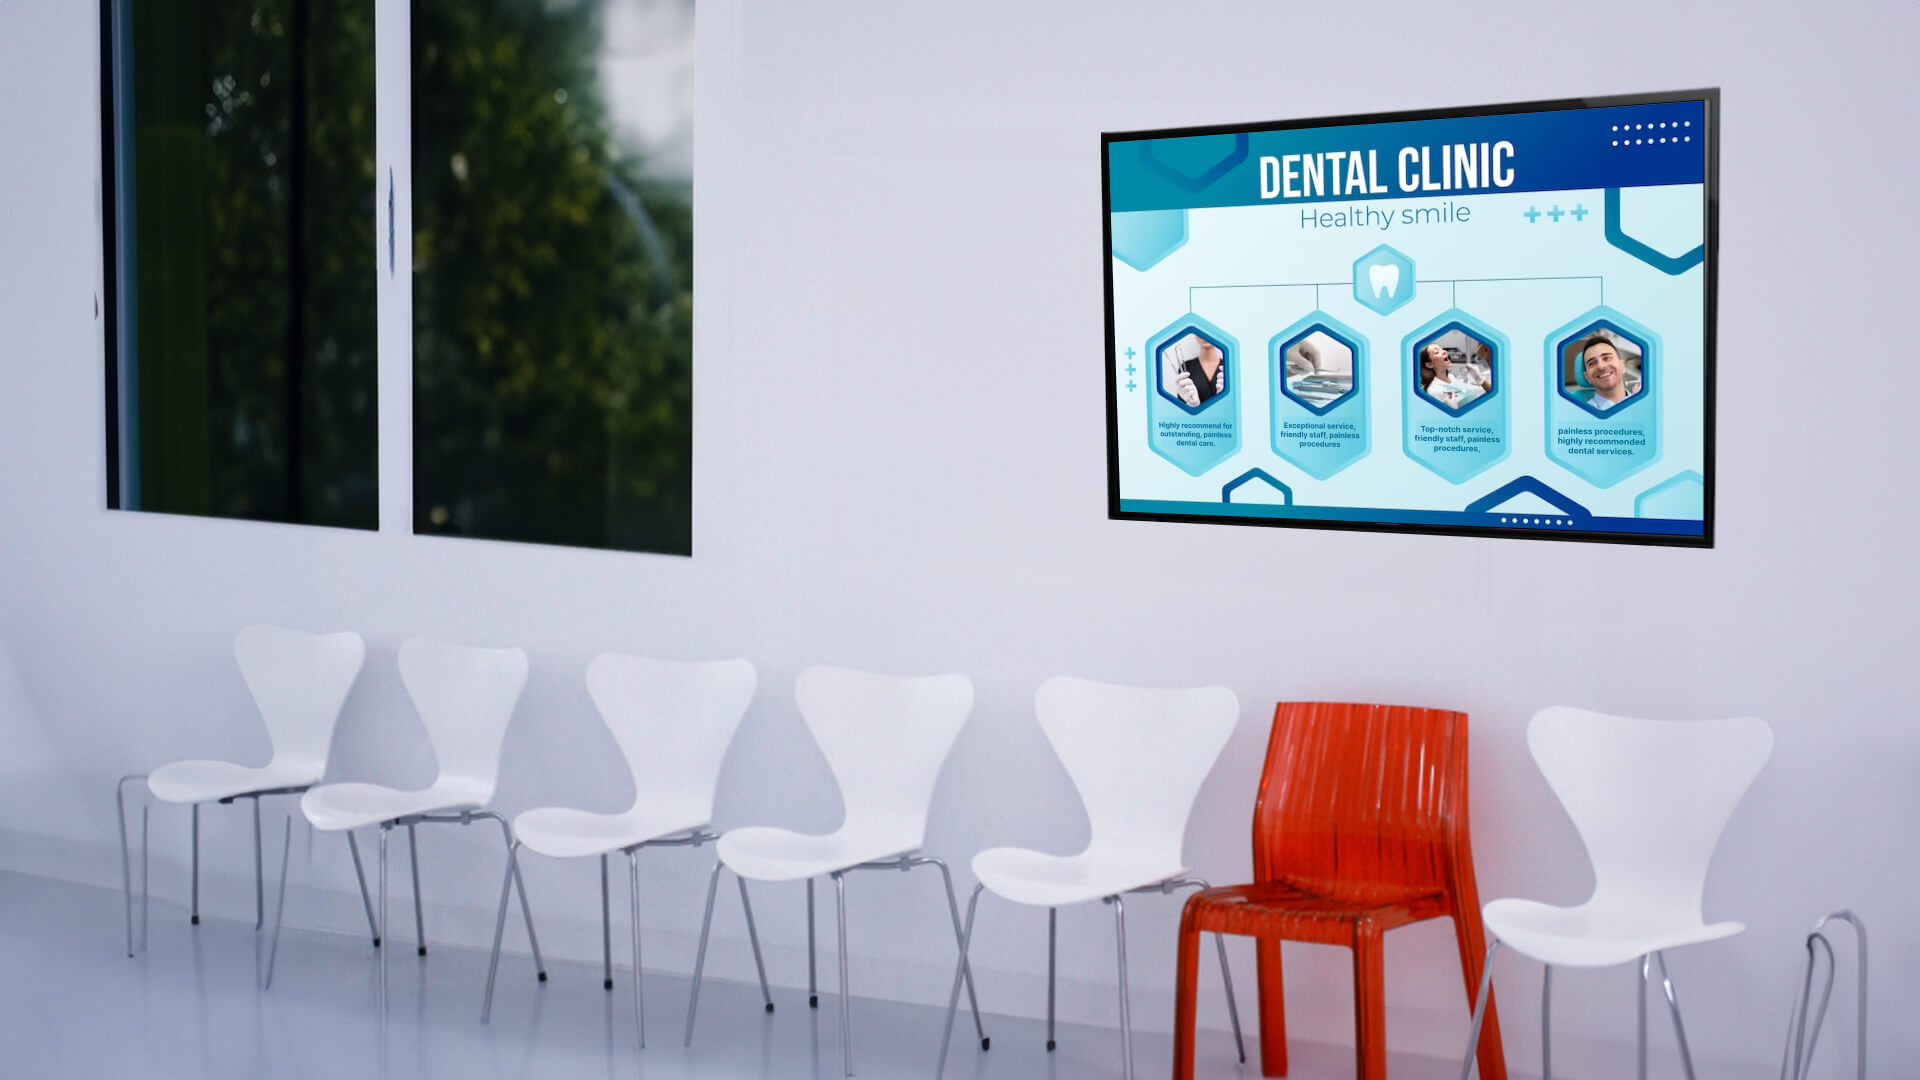 Digital signage in a dental clinic showing patient feedback.